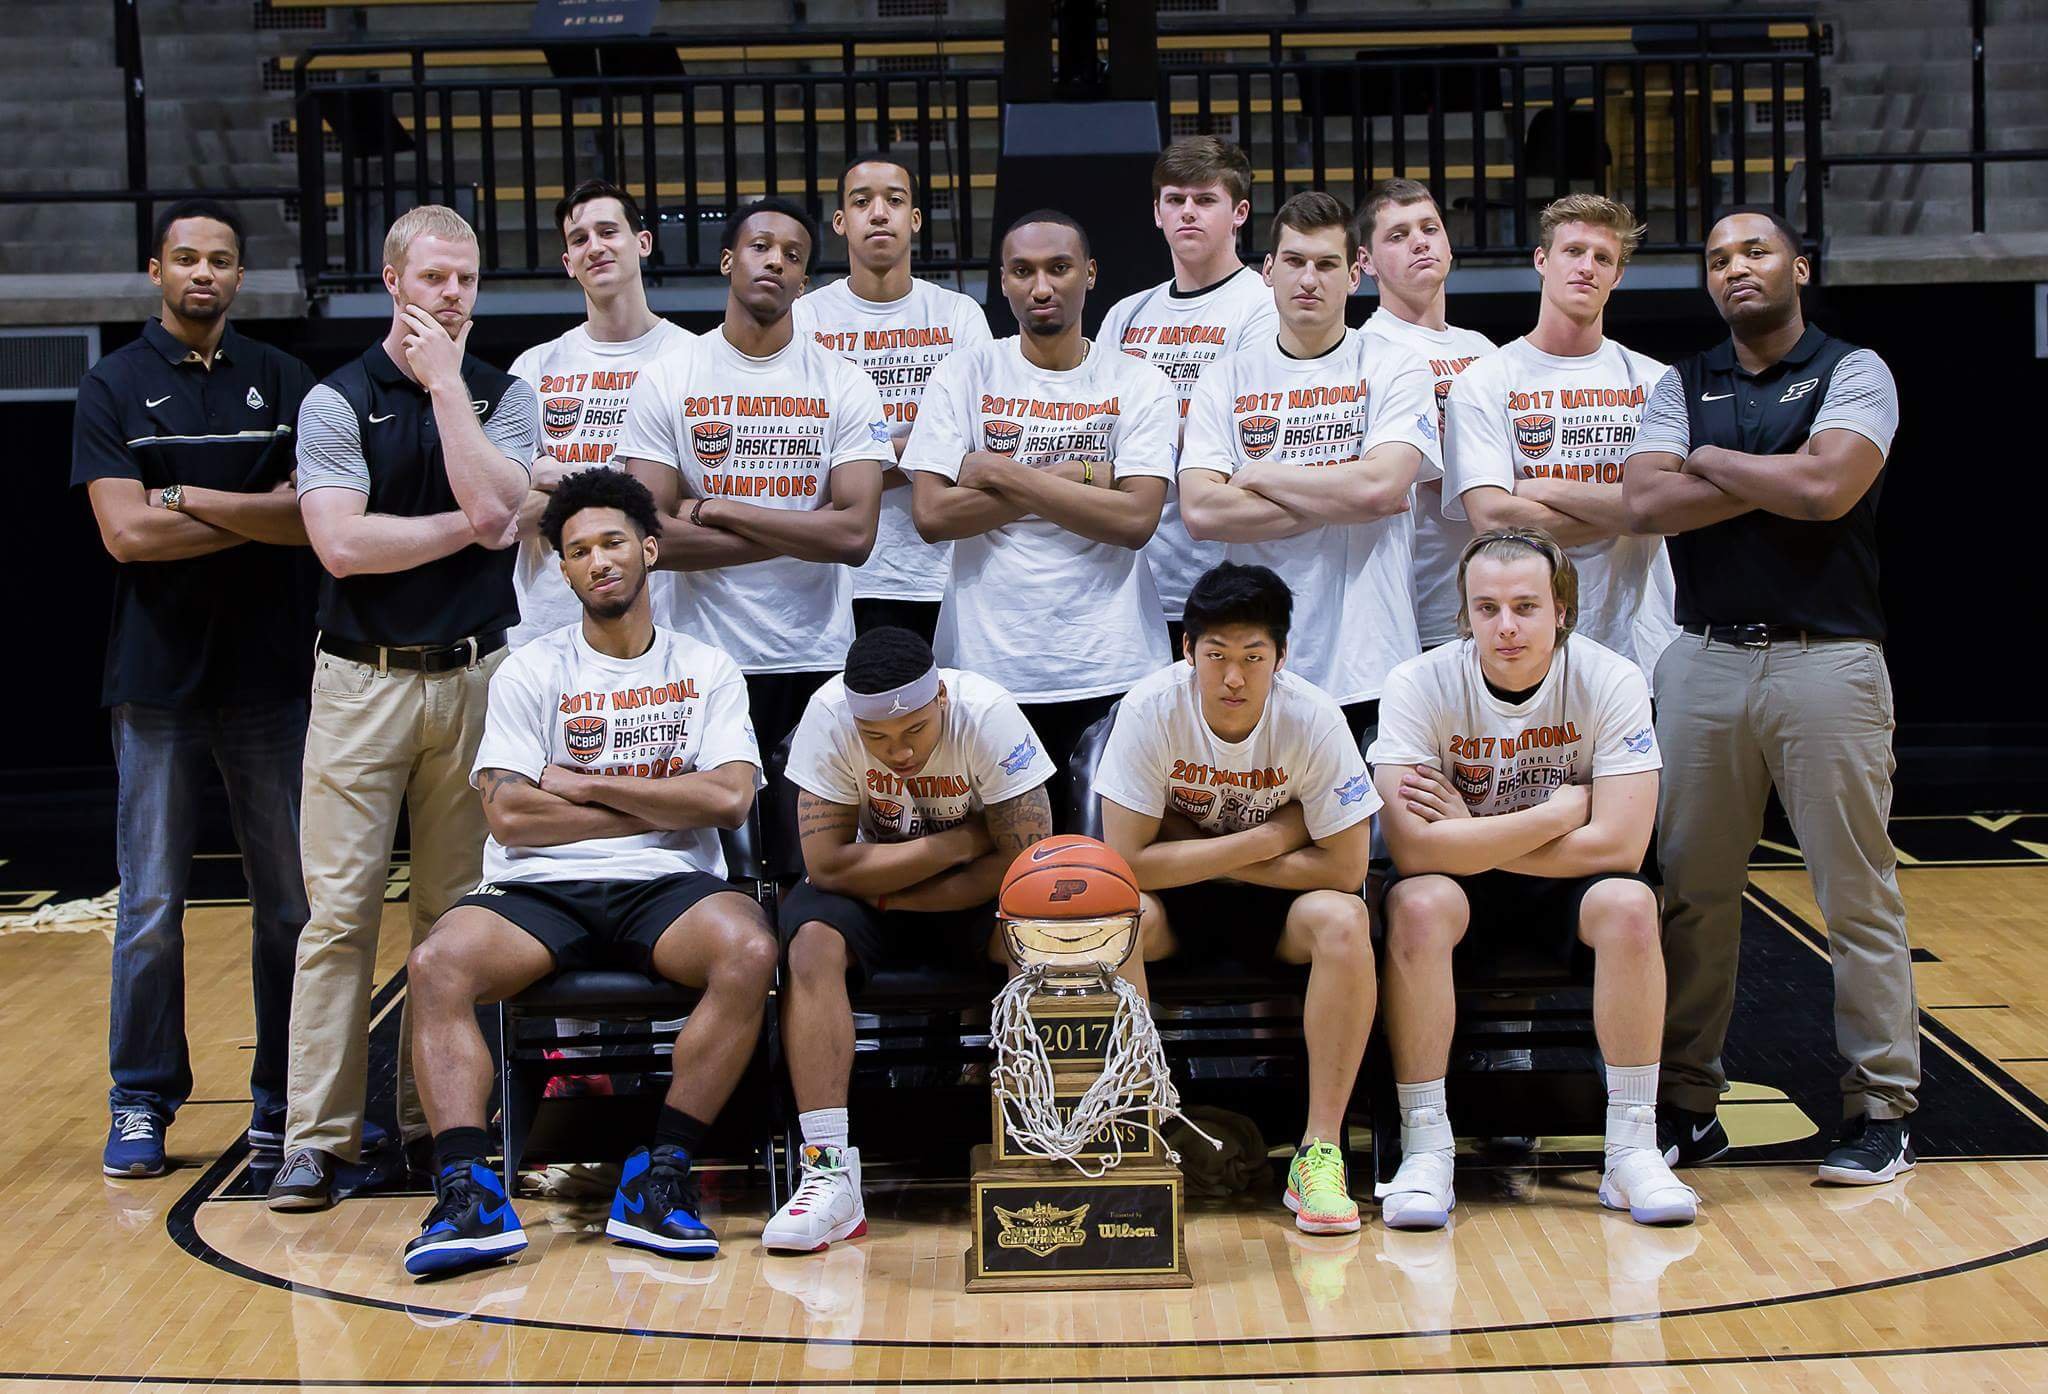 Purdue University Club Basketball Team, founded in 2014 by Scott Chemma,  and your current 2016-17 NCBBA National Champions.